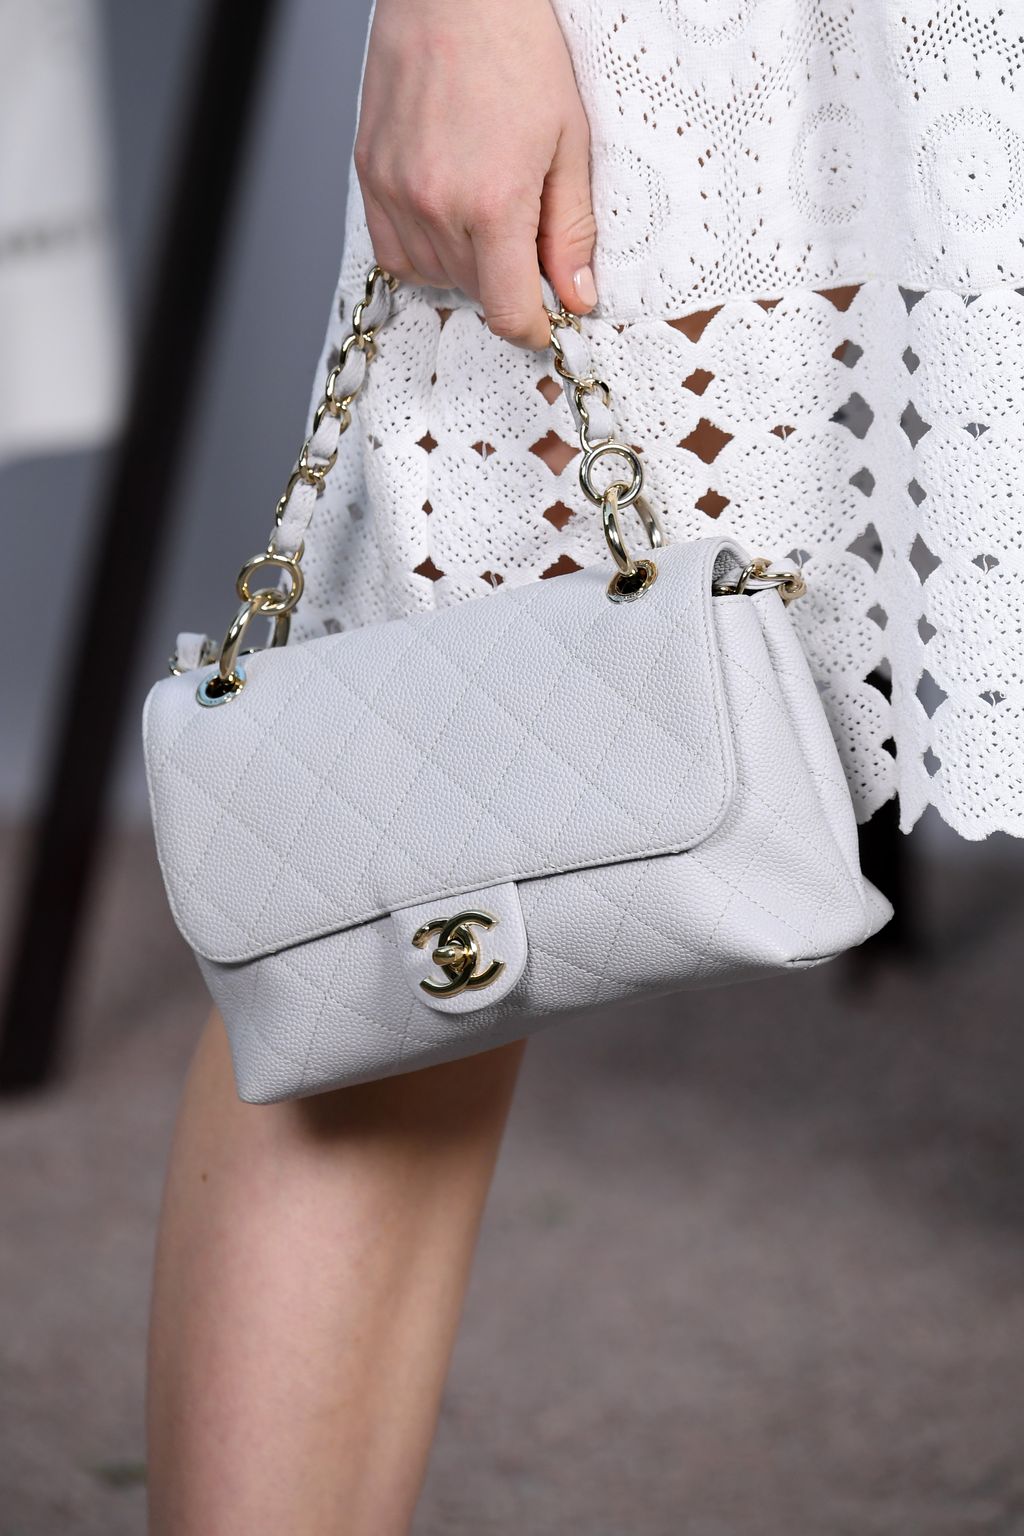 PARIS, FRANCE - JANUARY 21: Nadia Tereszkiewicz,bag detail, attends the Chanel Haute Couture Spring/Summer 2020 show as part of Paris Fashion Week at Grand Palais on January 21, 2020 in Paris, France. (Photo by Pascal Le Segretain/Getty Images)